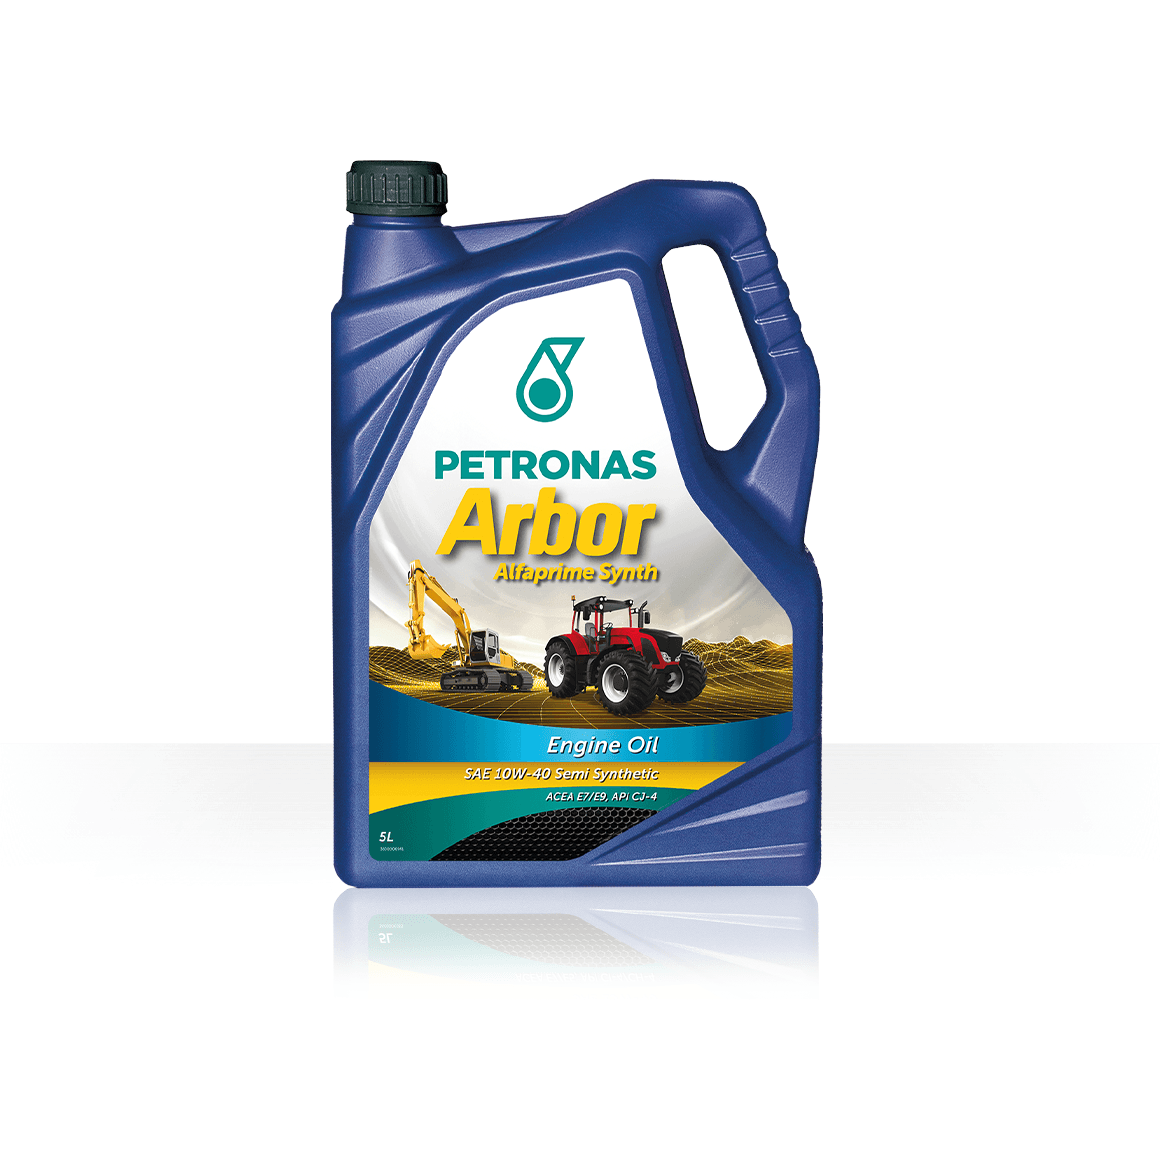 Arbor Hydraulic 46 HV 5L - Xpert Cleaning